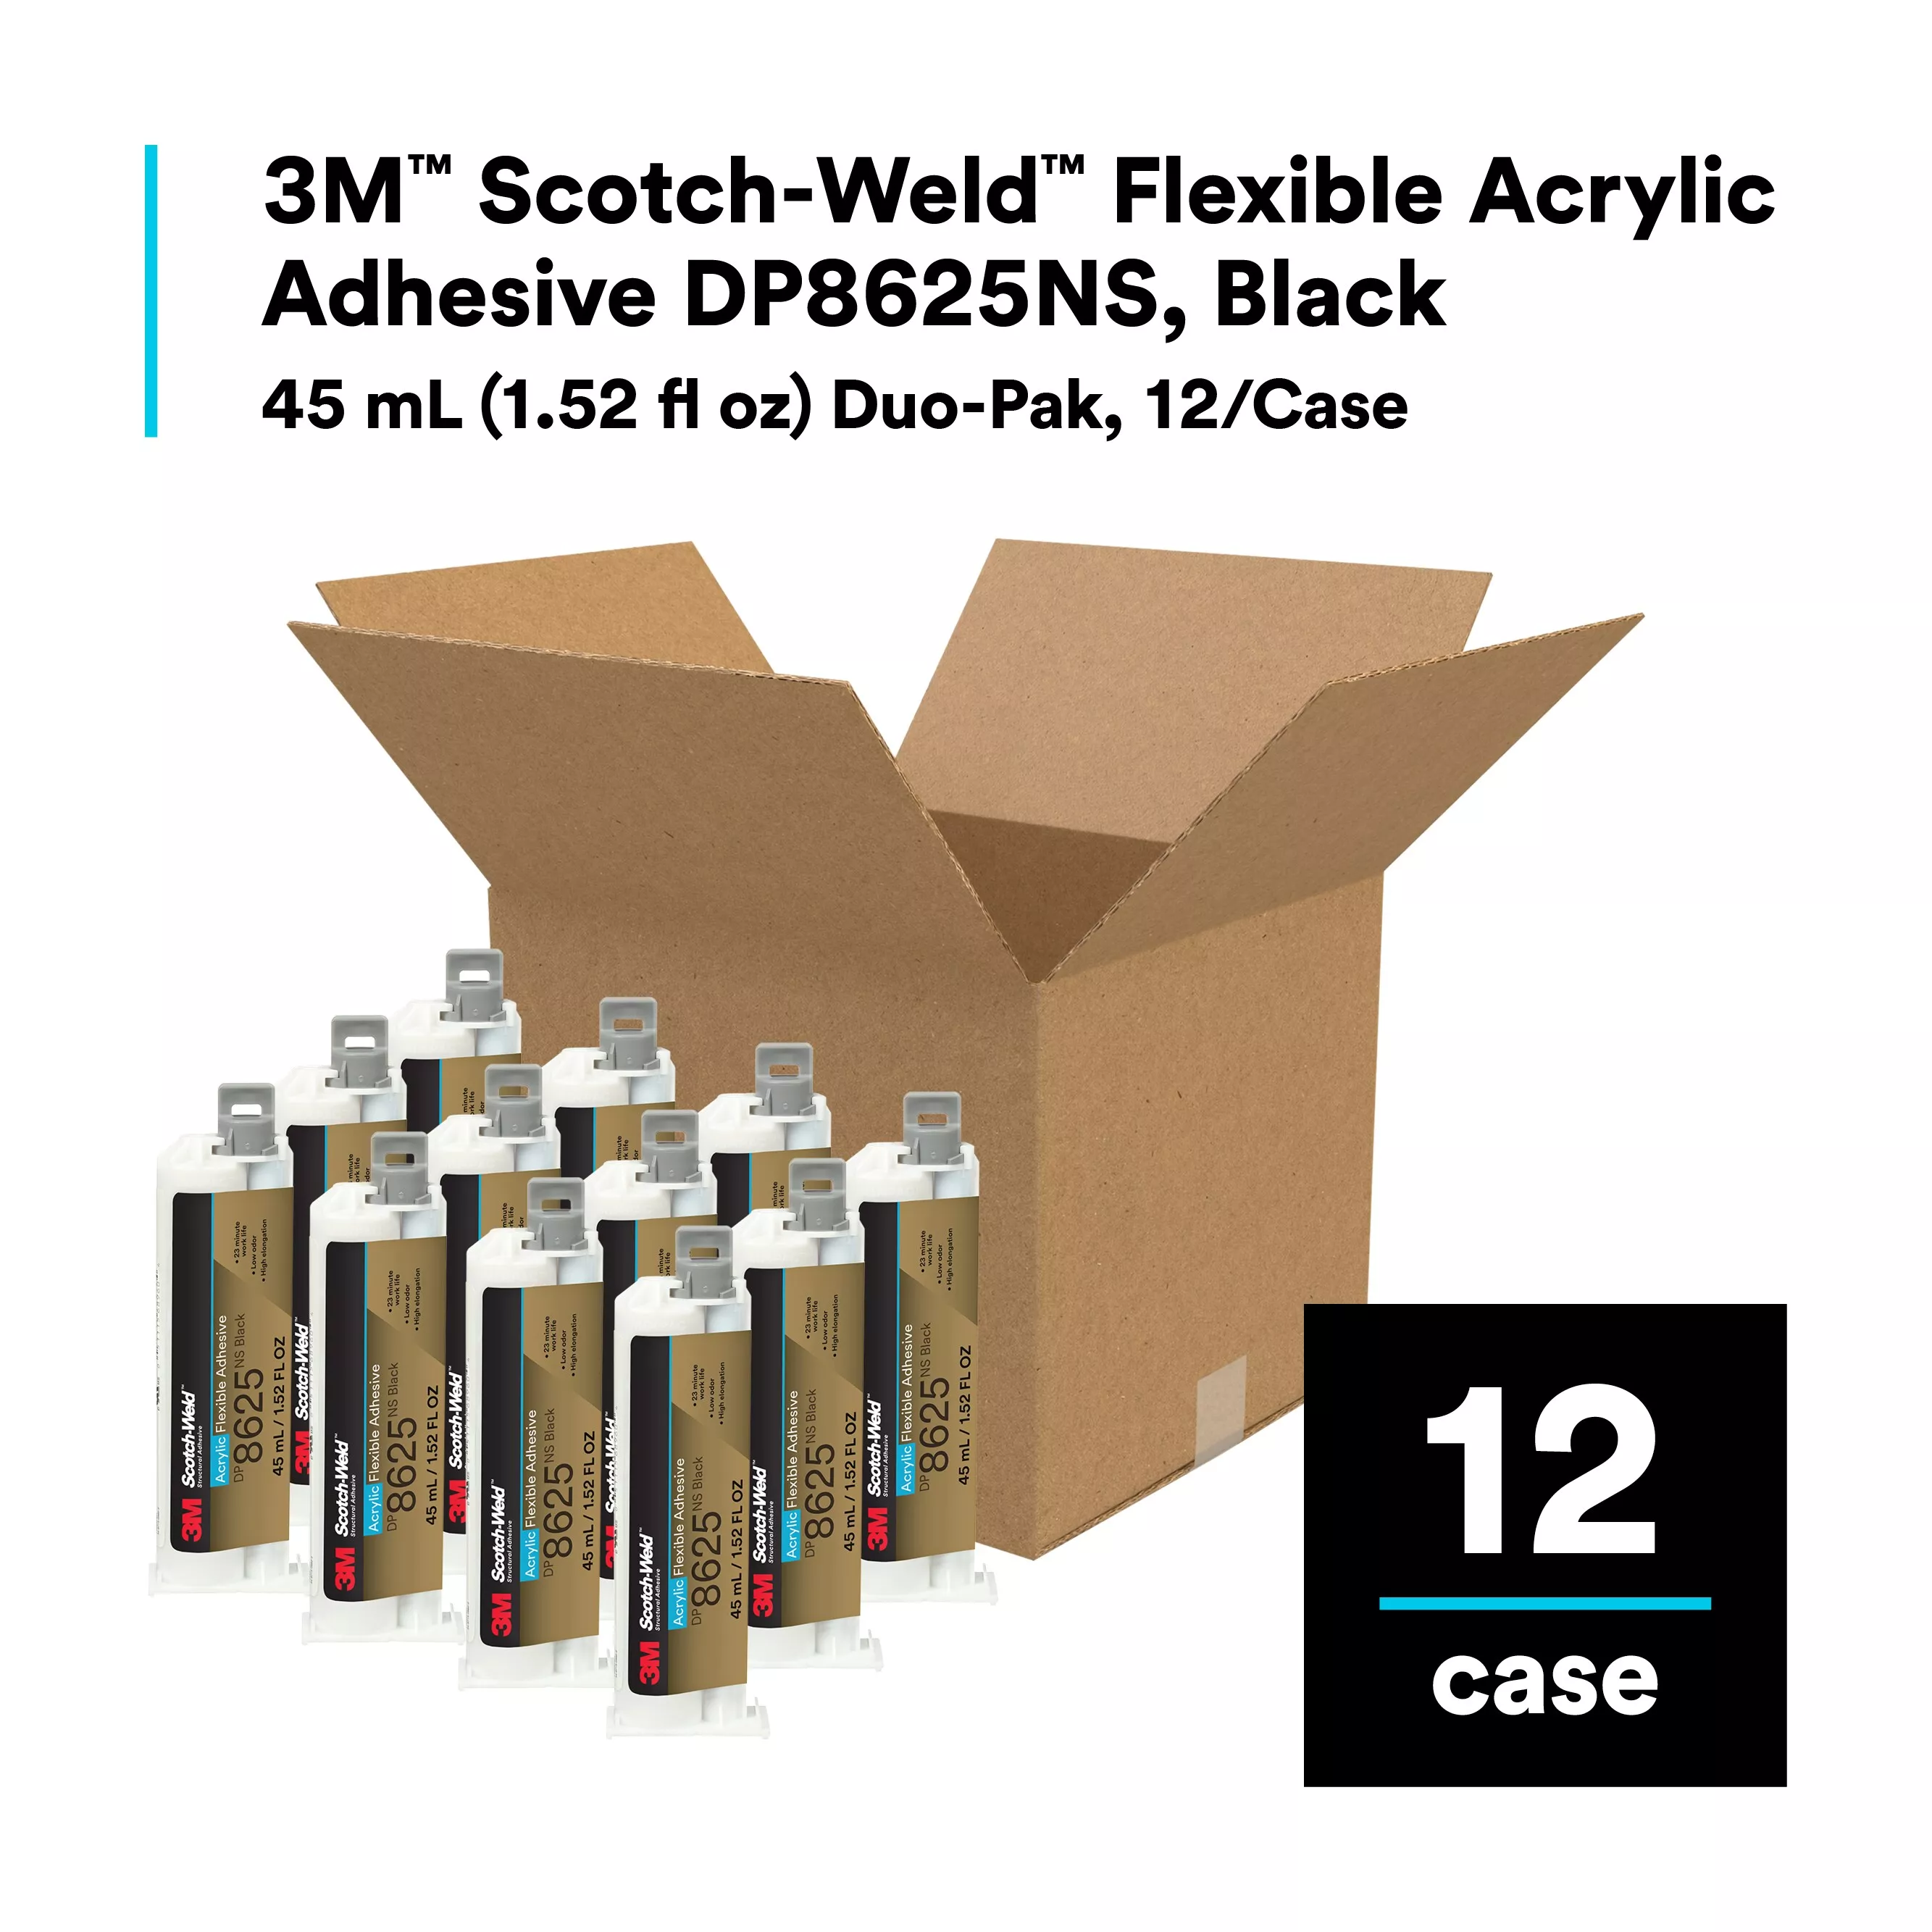 Product Number DP8625NS | 3M™ Scotch-Weld™ Flexible Acrylic Adhesive DP8625NS